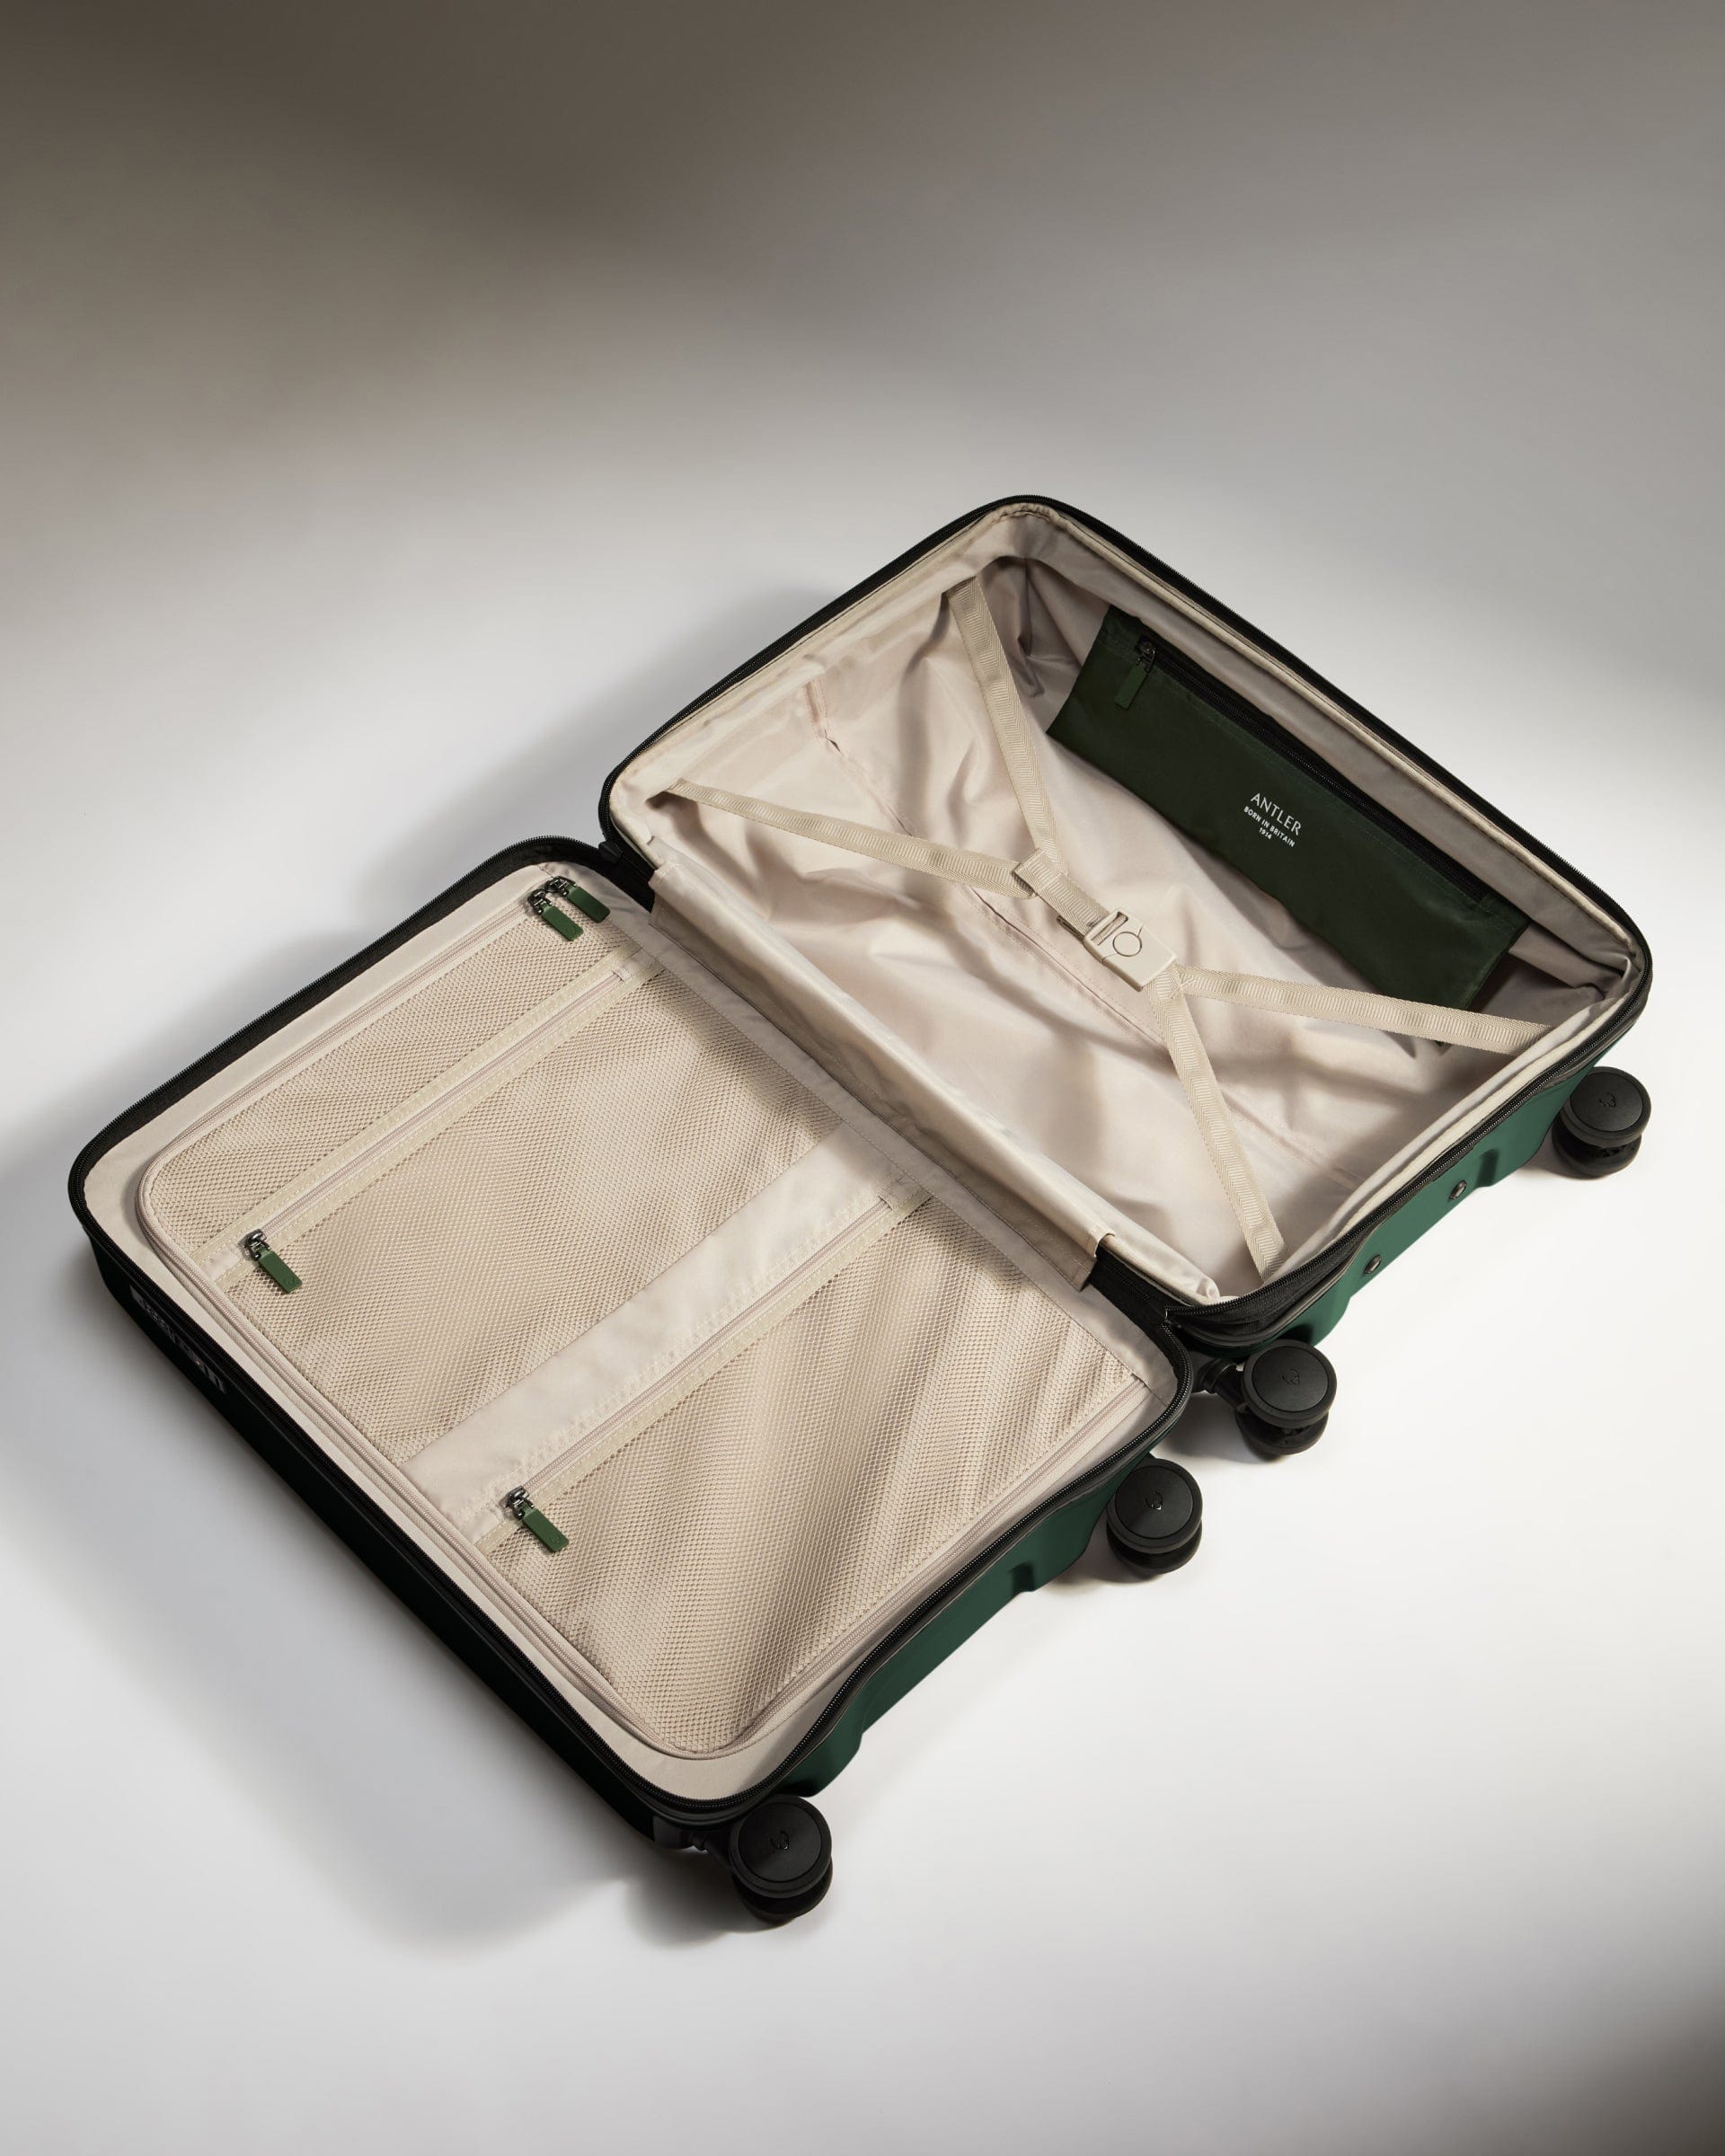 Antler Luggage -  Icon Stripe Set with Biggest Cabin in Antler Green - Hard Suitcase Icon Stripe Set with Biggest Cabin in Green | Lightweight & Hard Shell Suitcase